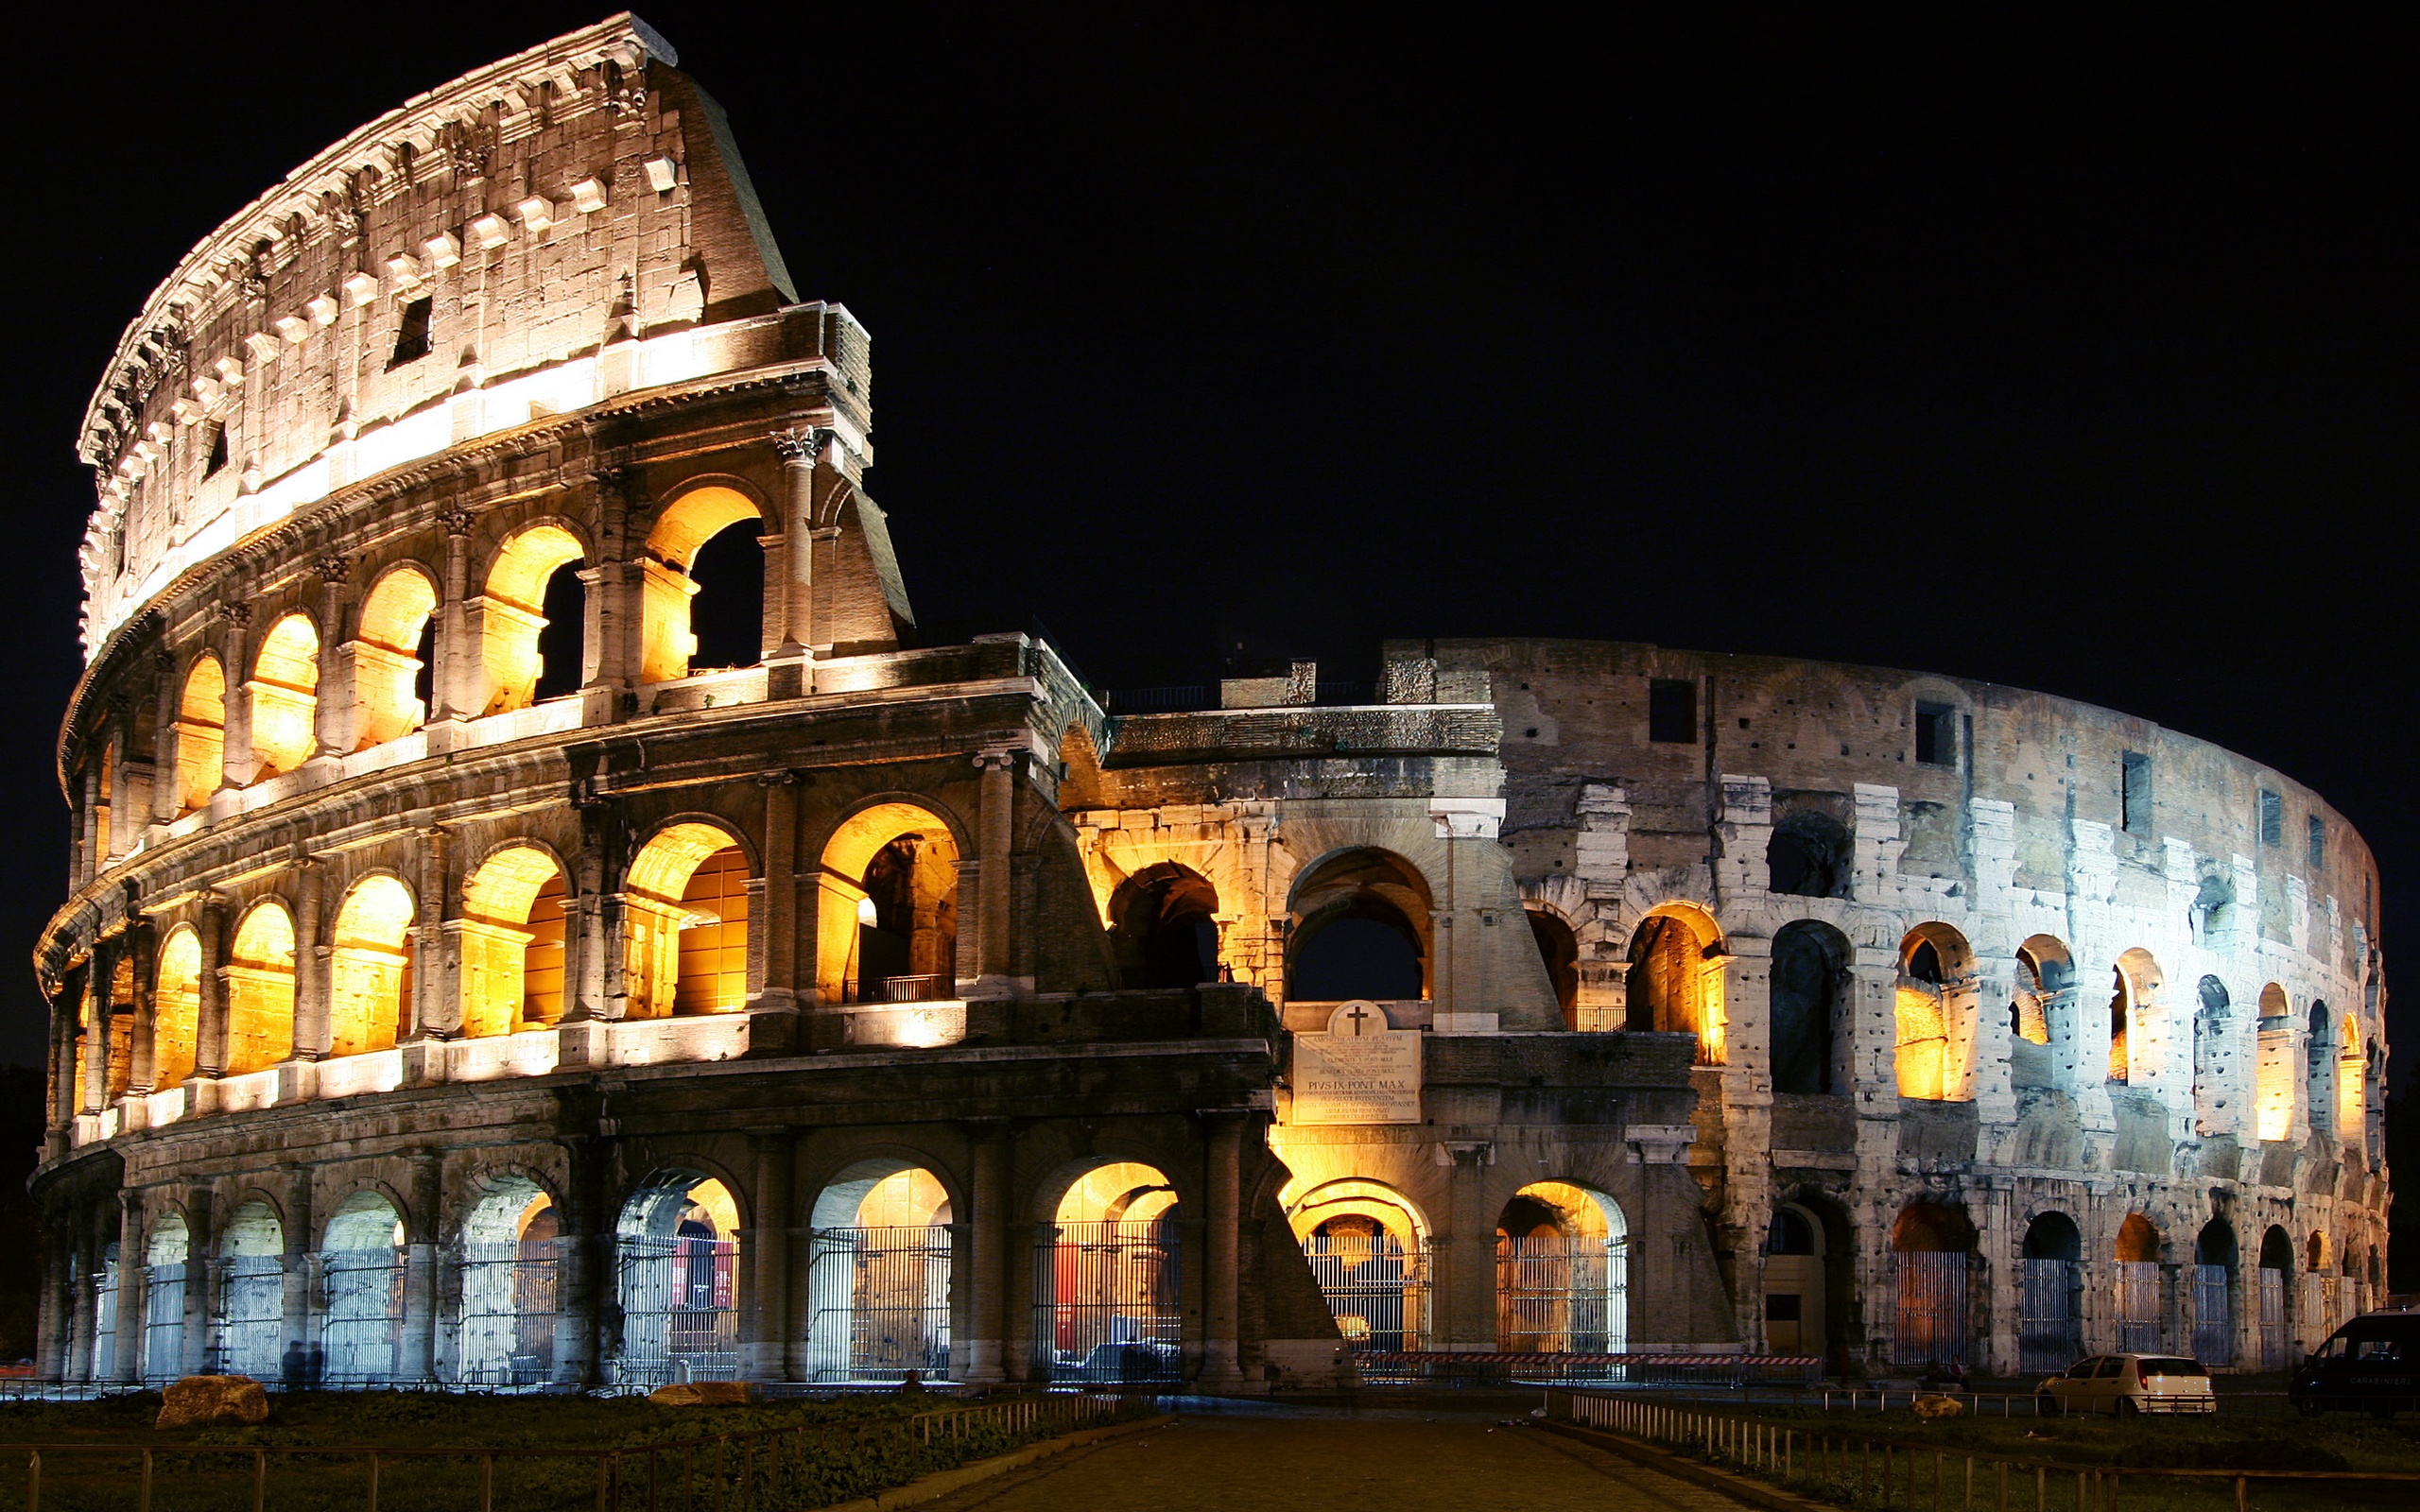 Colosseum at Night Wallpaper in 2560x1600 Widescreen